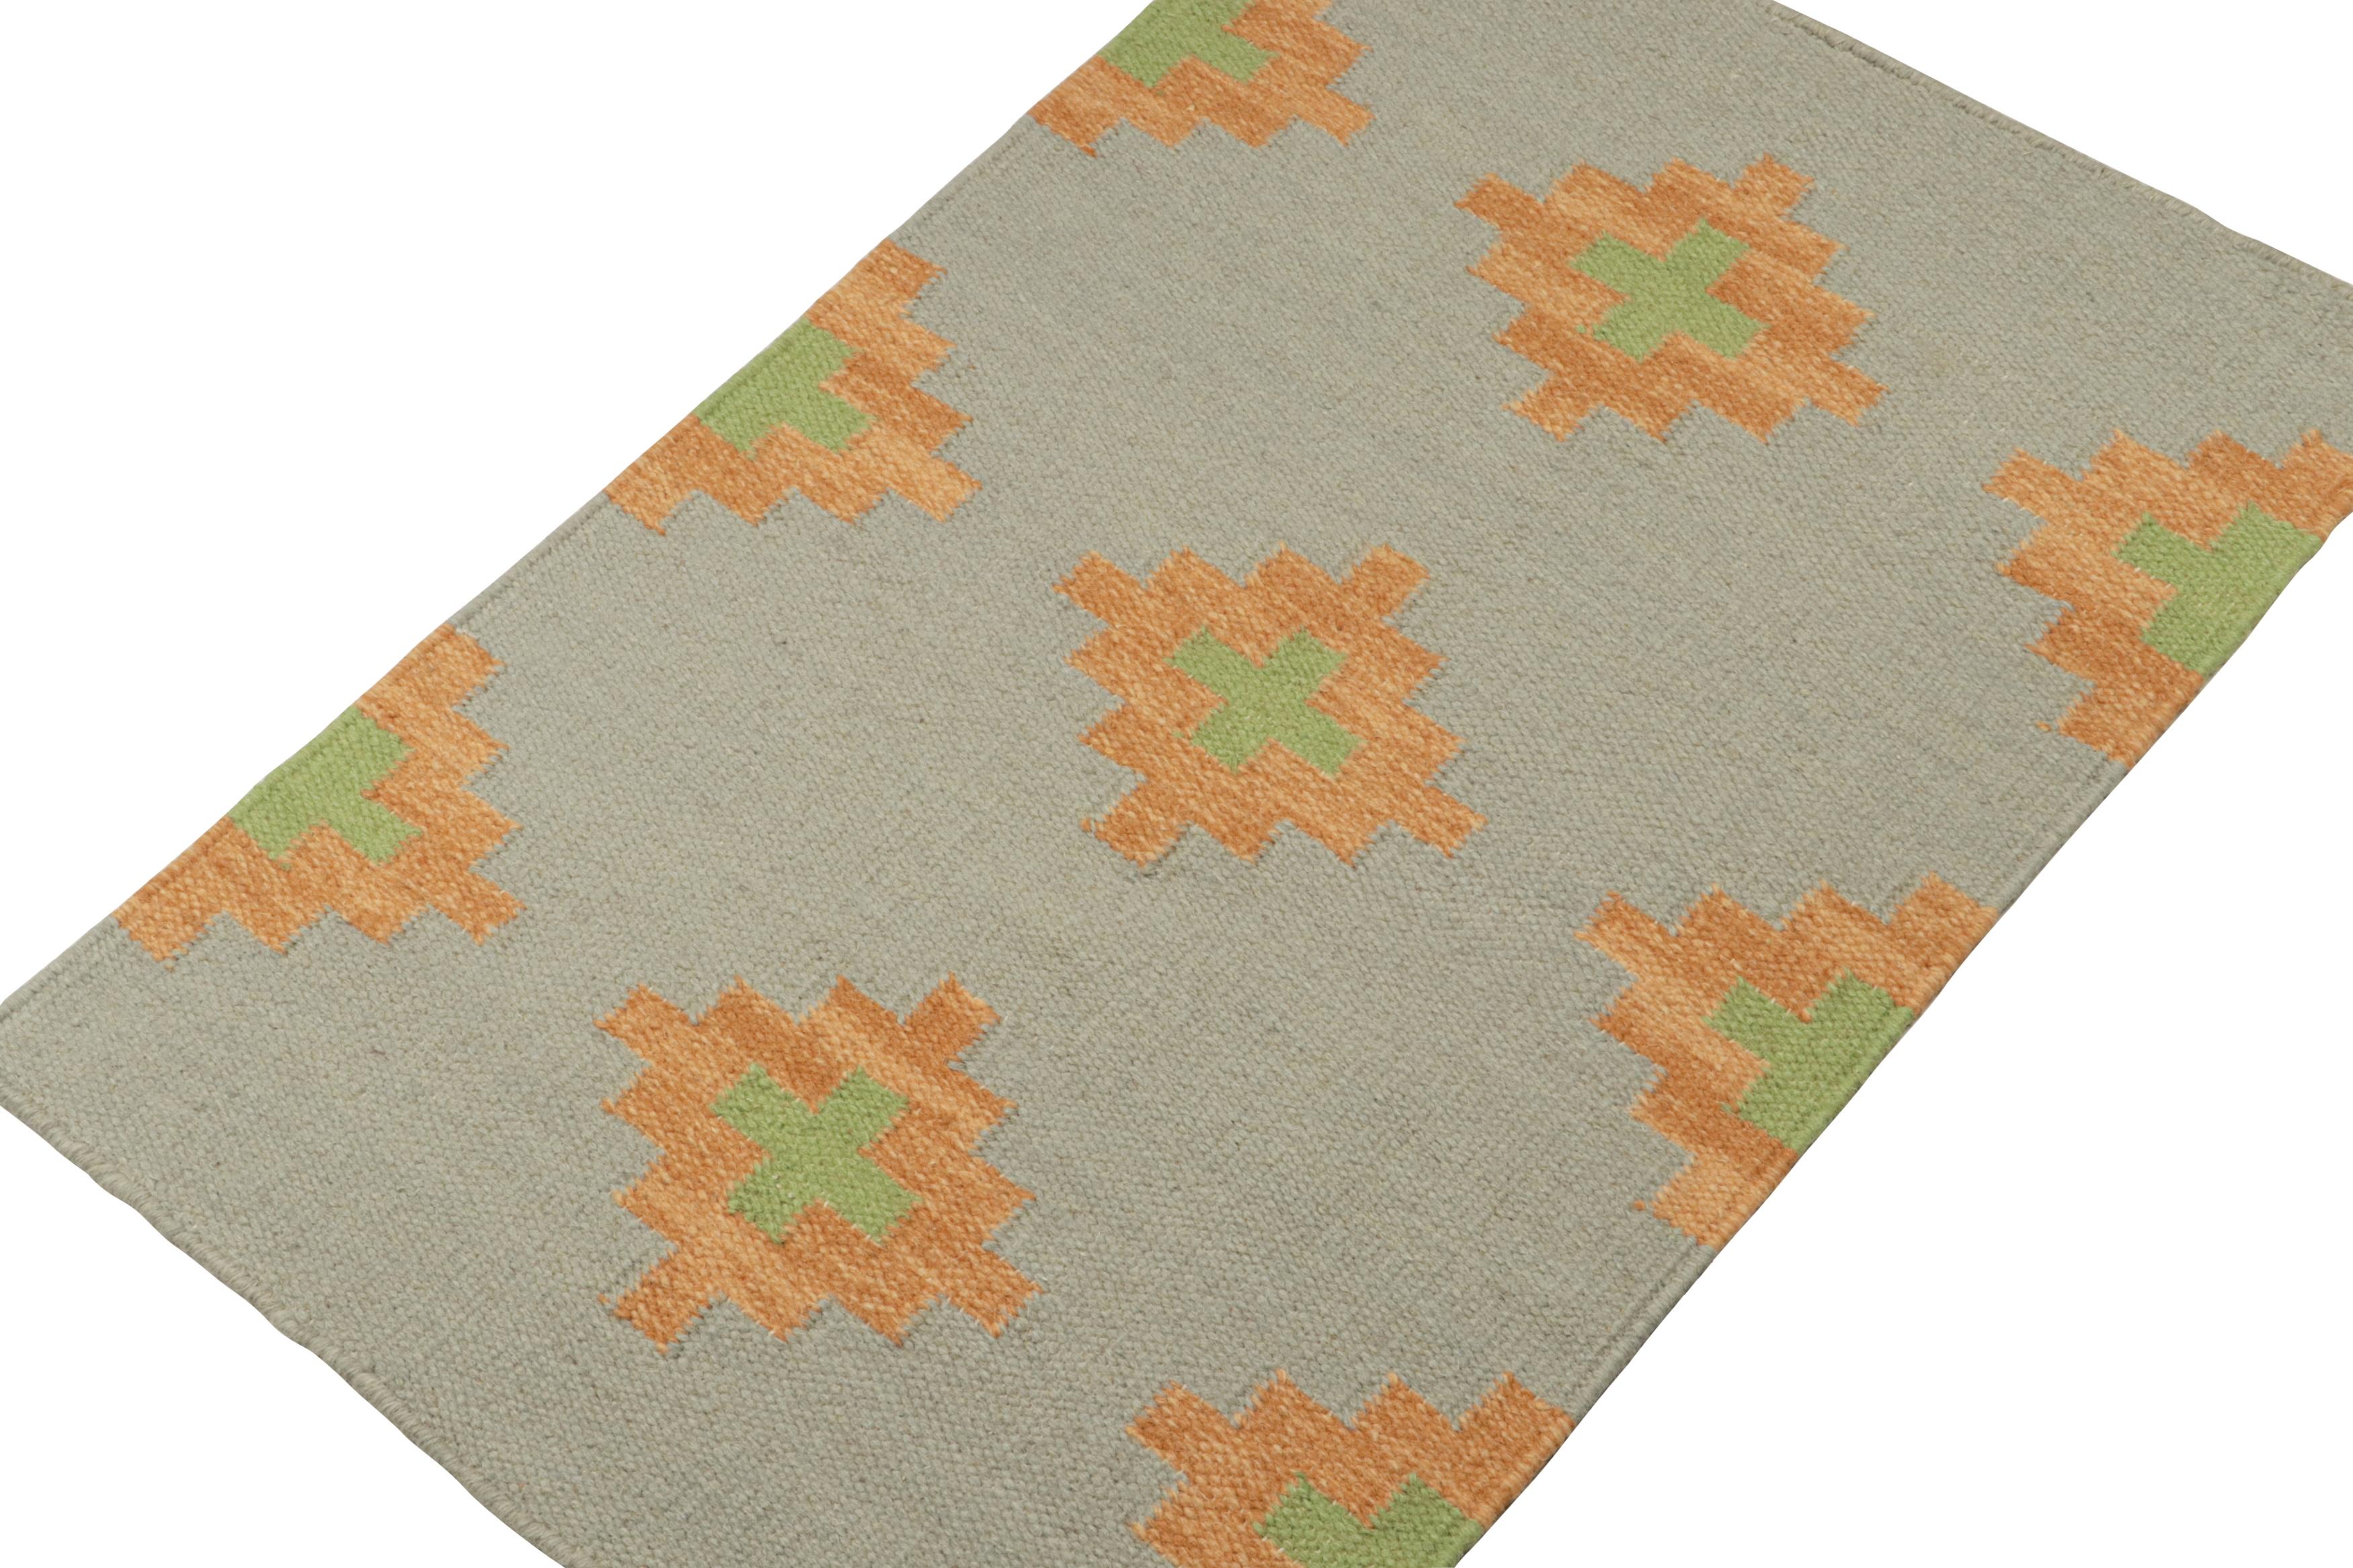 Inspired by tribal kilims, this 2x3 piece is an elegant new addition to the flatweave collection by Rug & Kilim.  

On the Design: 

Handwoven in wool, this contemporary kilim carries gold & green geometric patterns on grey. Further enjoying a smart